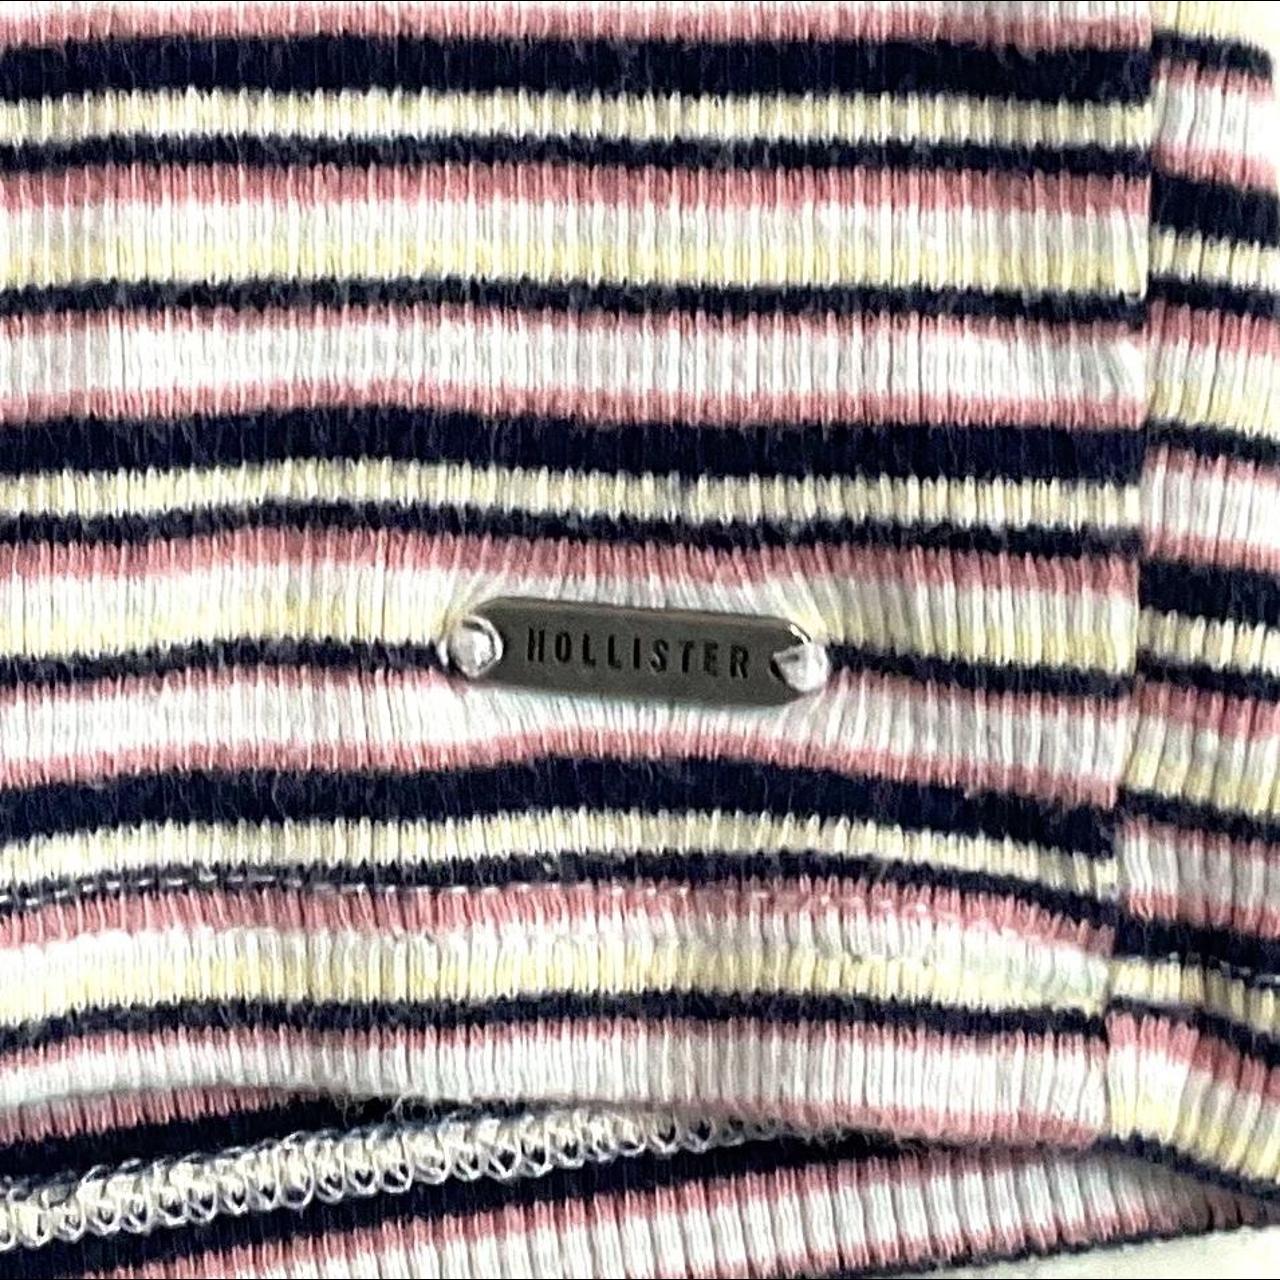 Hollister striped button down top, size small, - Depop